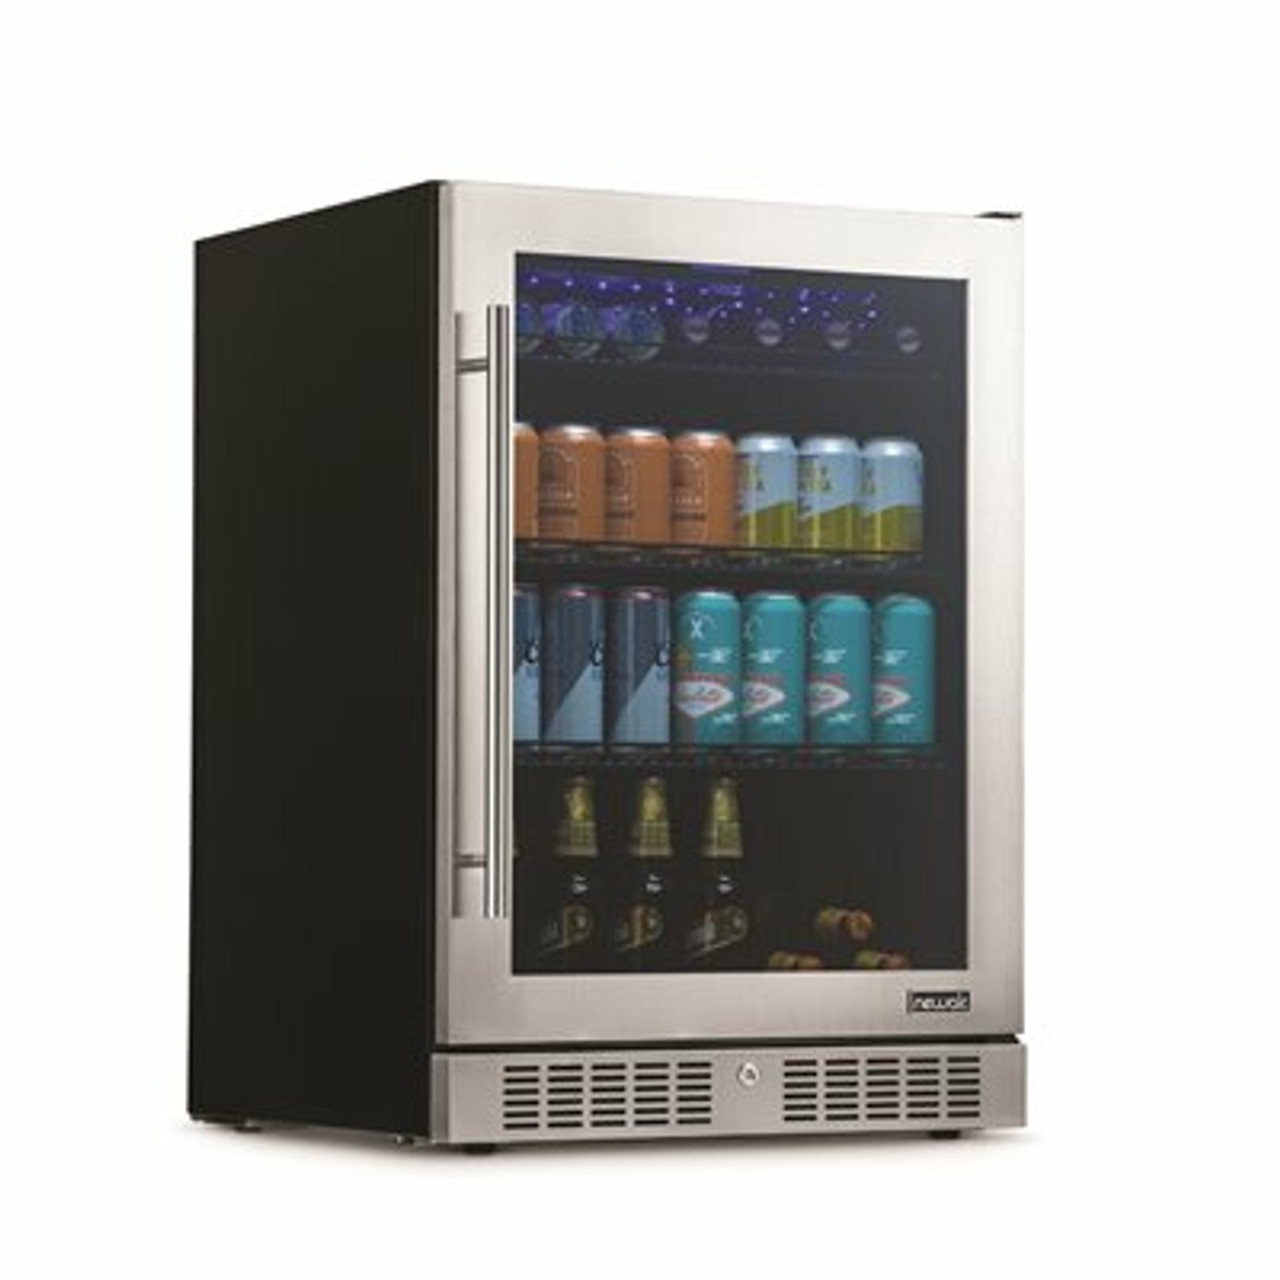 Newair Built-In Premium 24 In. 224 Can Beverage Cooler Color Changing Led Lights, Seamless Stainless Steel Door